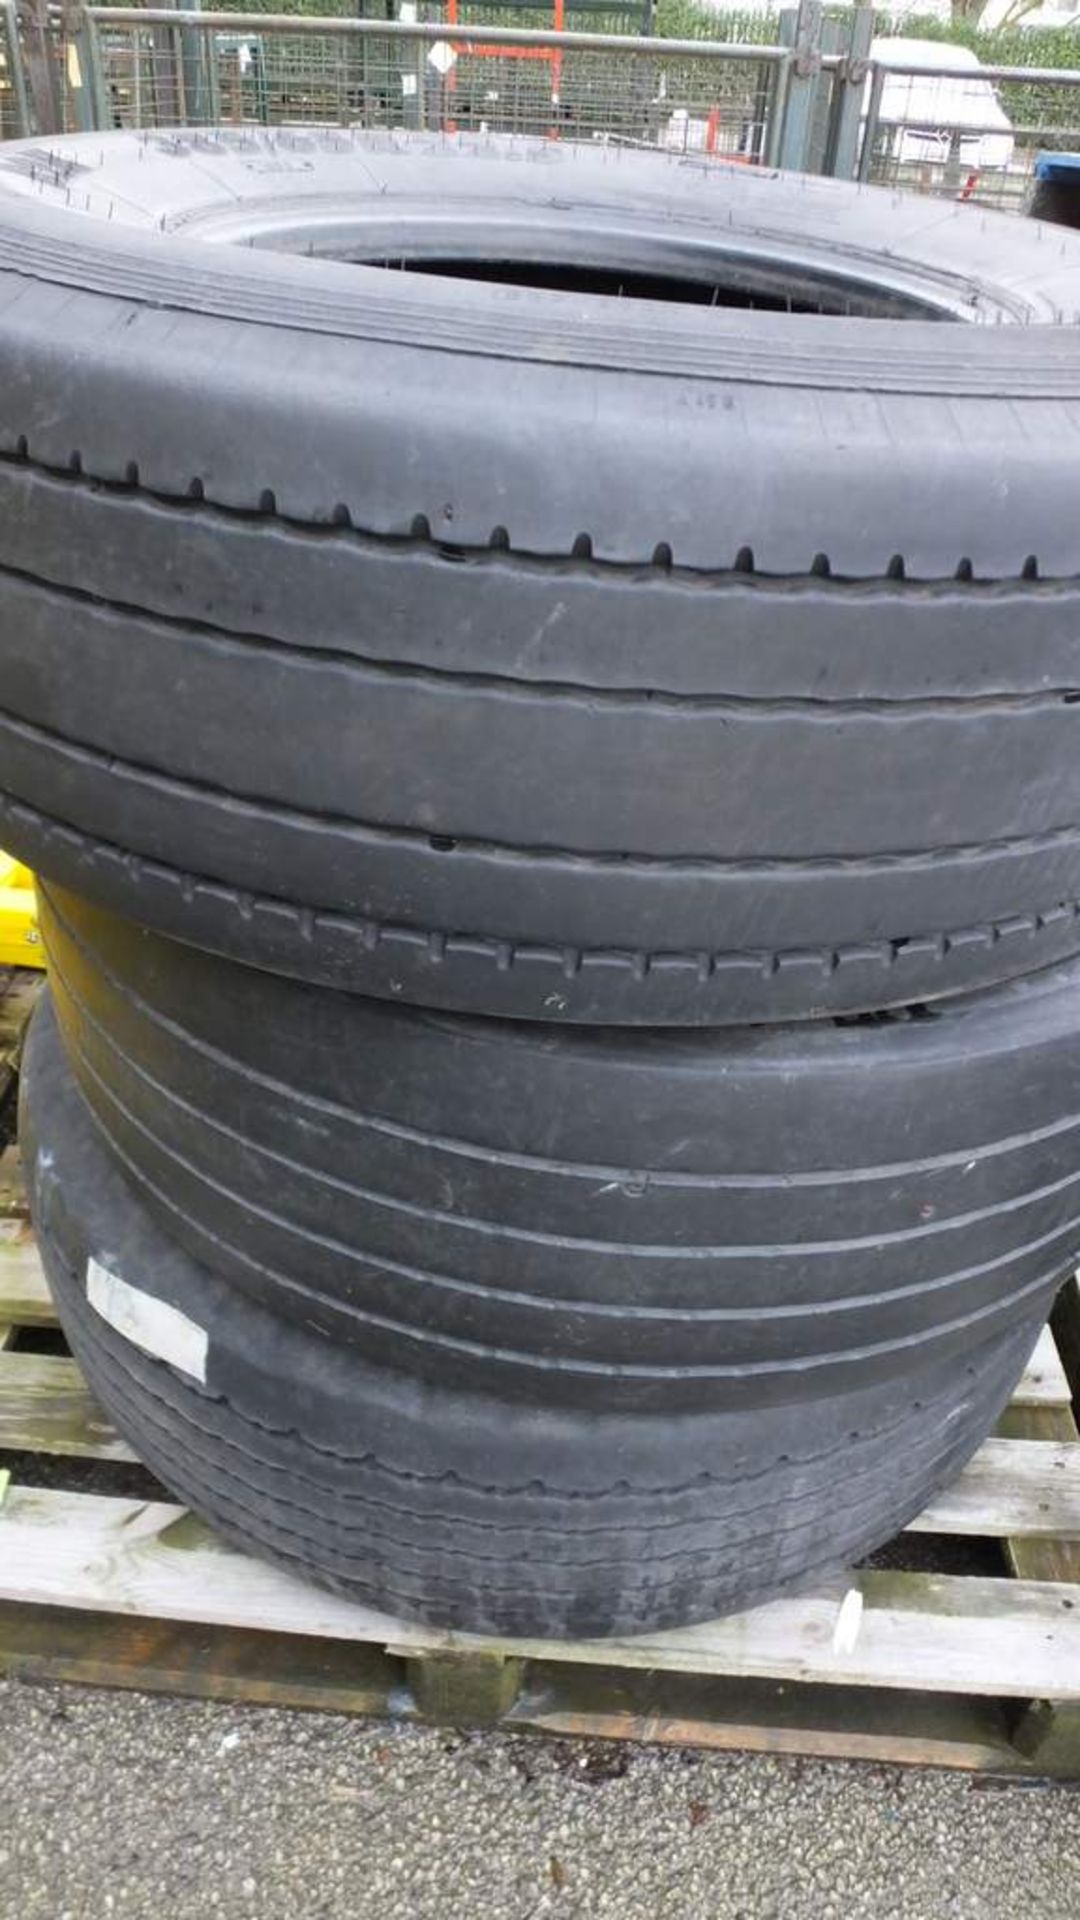 3x Used tyres - 355/65r 22.5 - Image 2 of 3